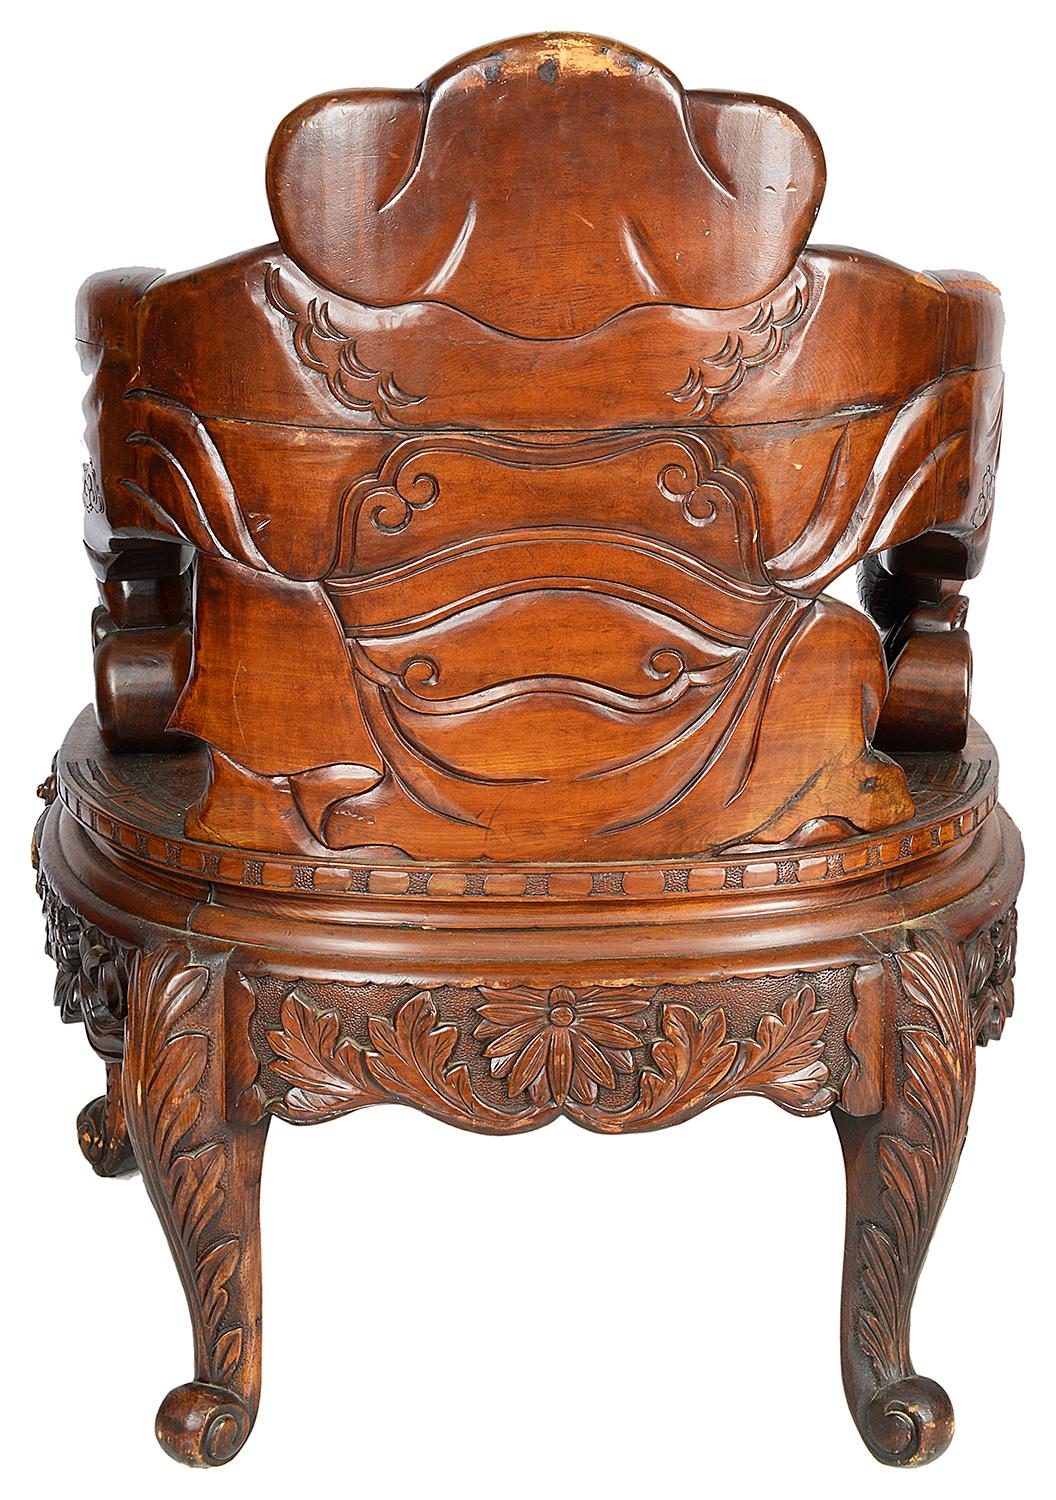 20th Century Meiji Period Century Japanese Carved Wood Armchairs, circa 1900 For Sale